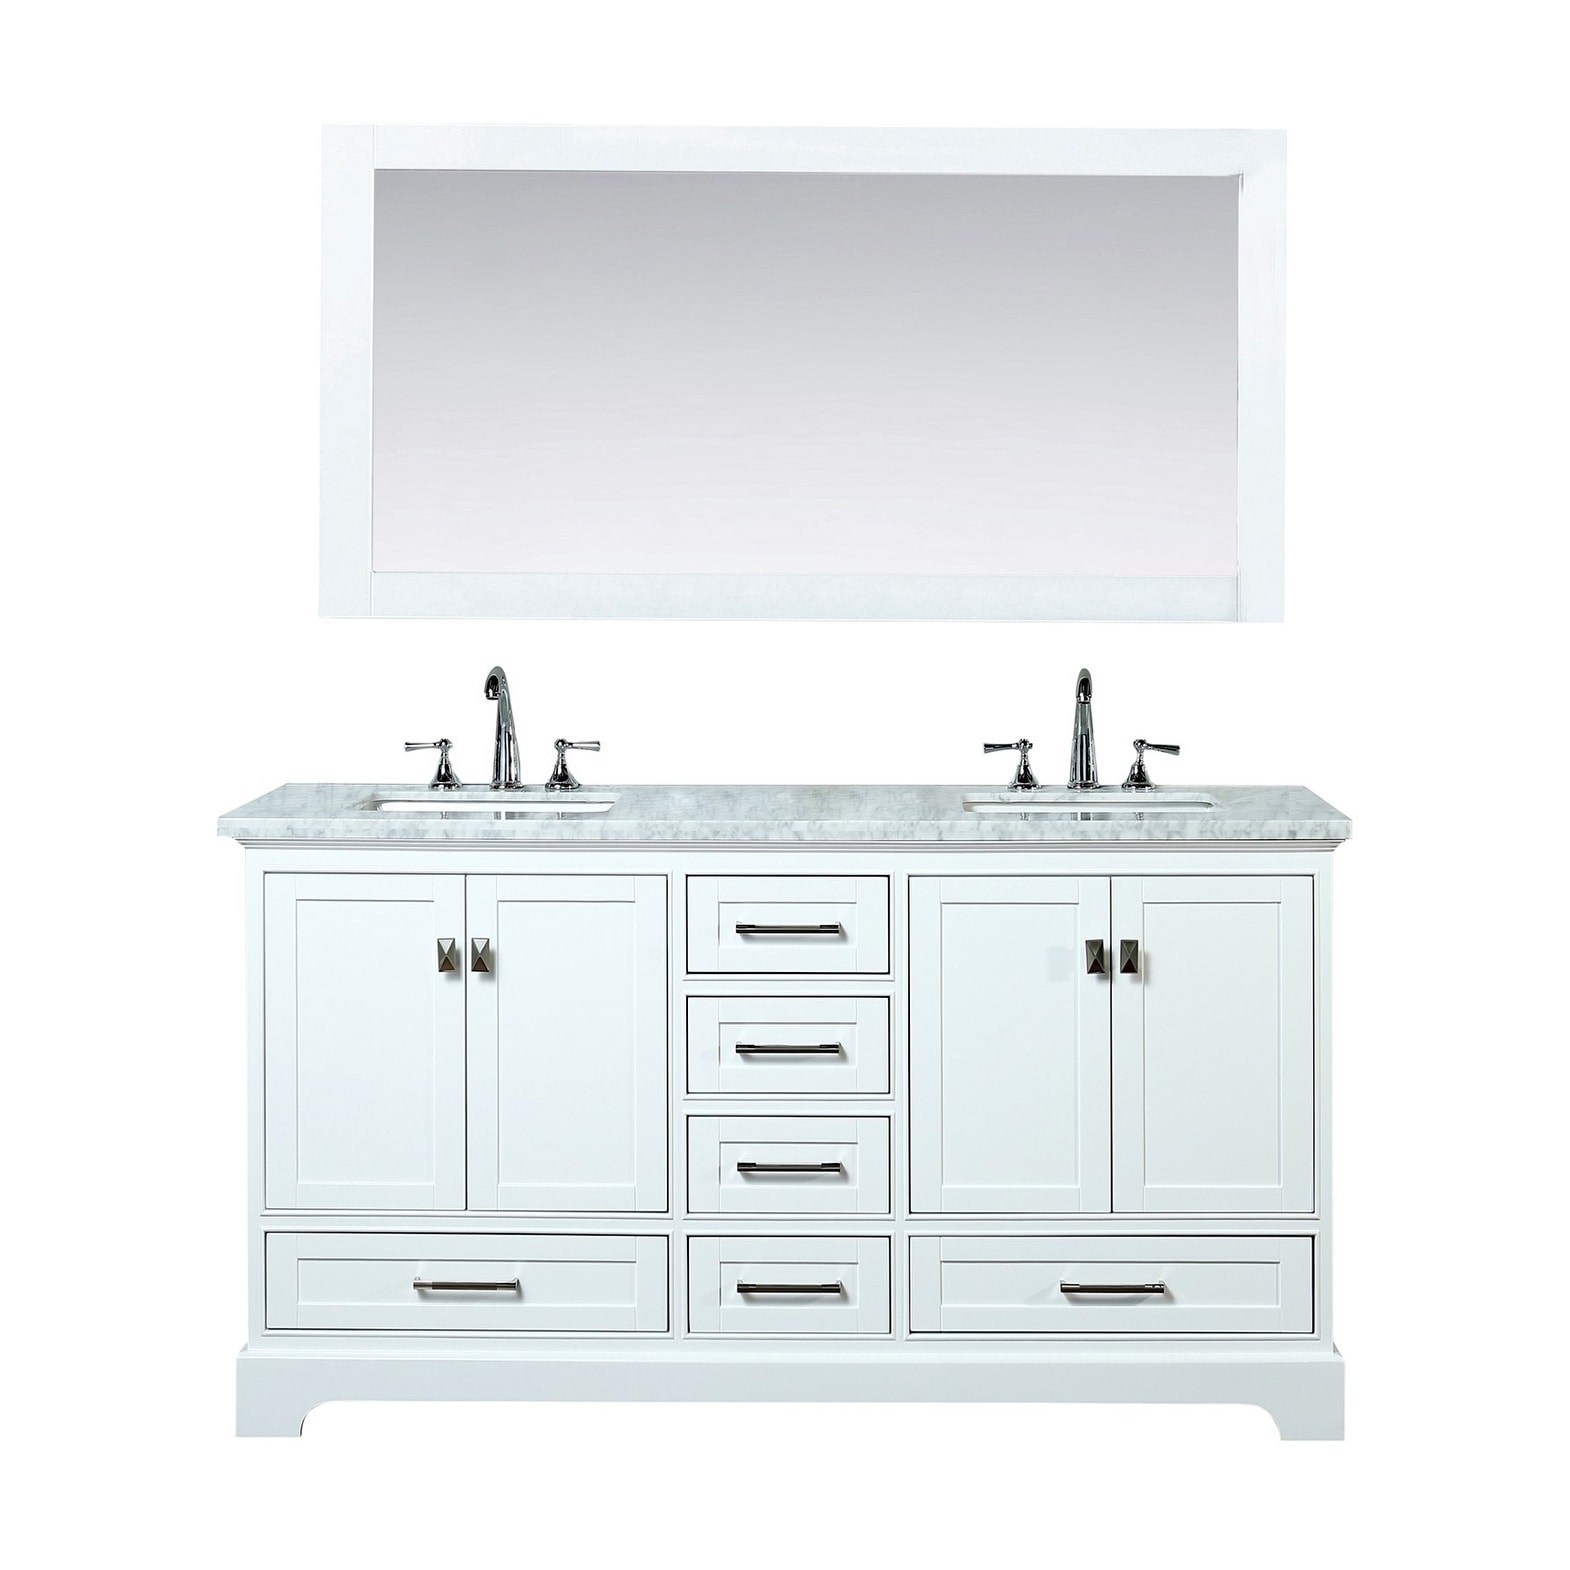 The Student Download 31 72 White Bathroom Vanity Double Sink